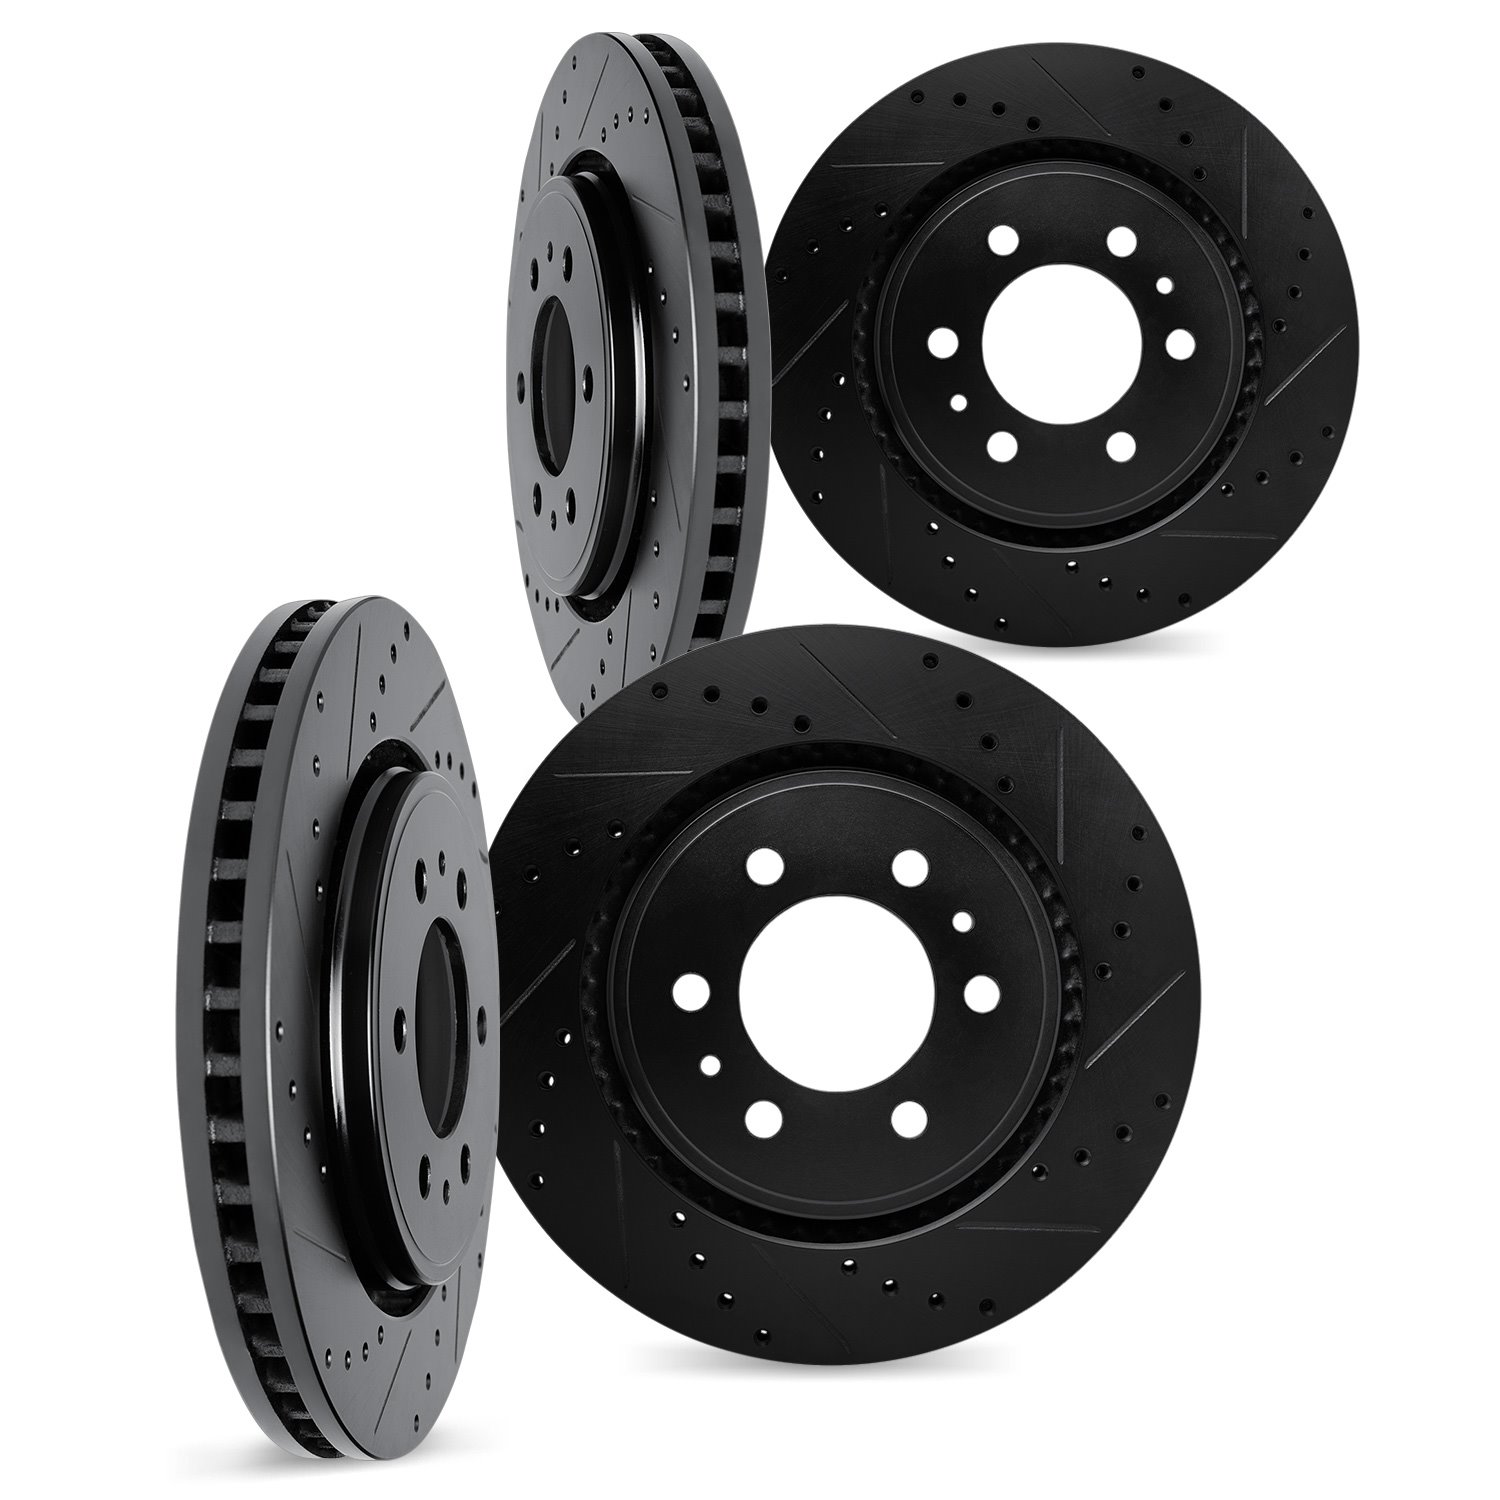 8004-68009 Drilled/Slotted Brake Rotors [Black], Fits Select Infiniti/Nissan, Position: Front and Rear